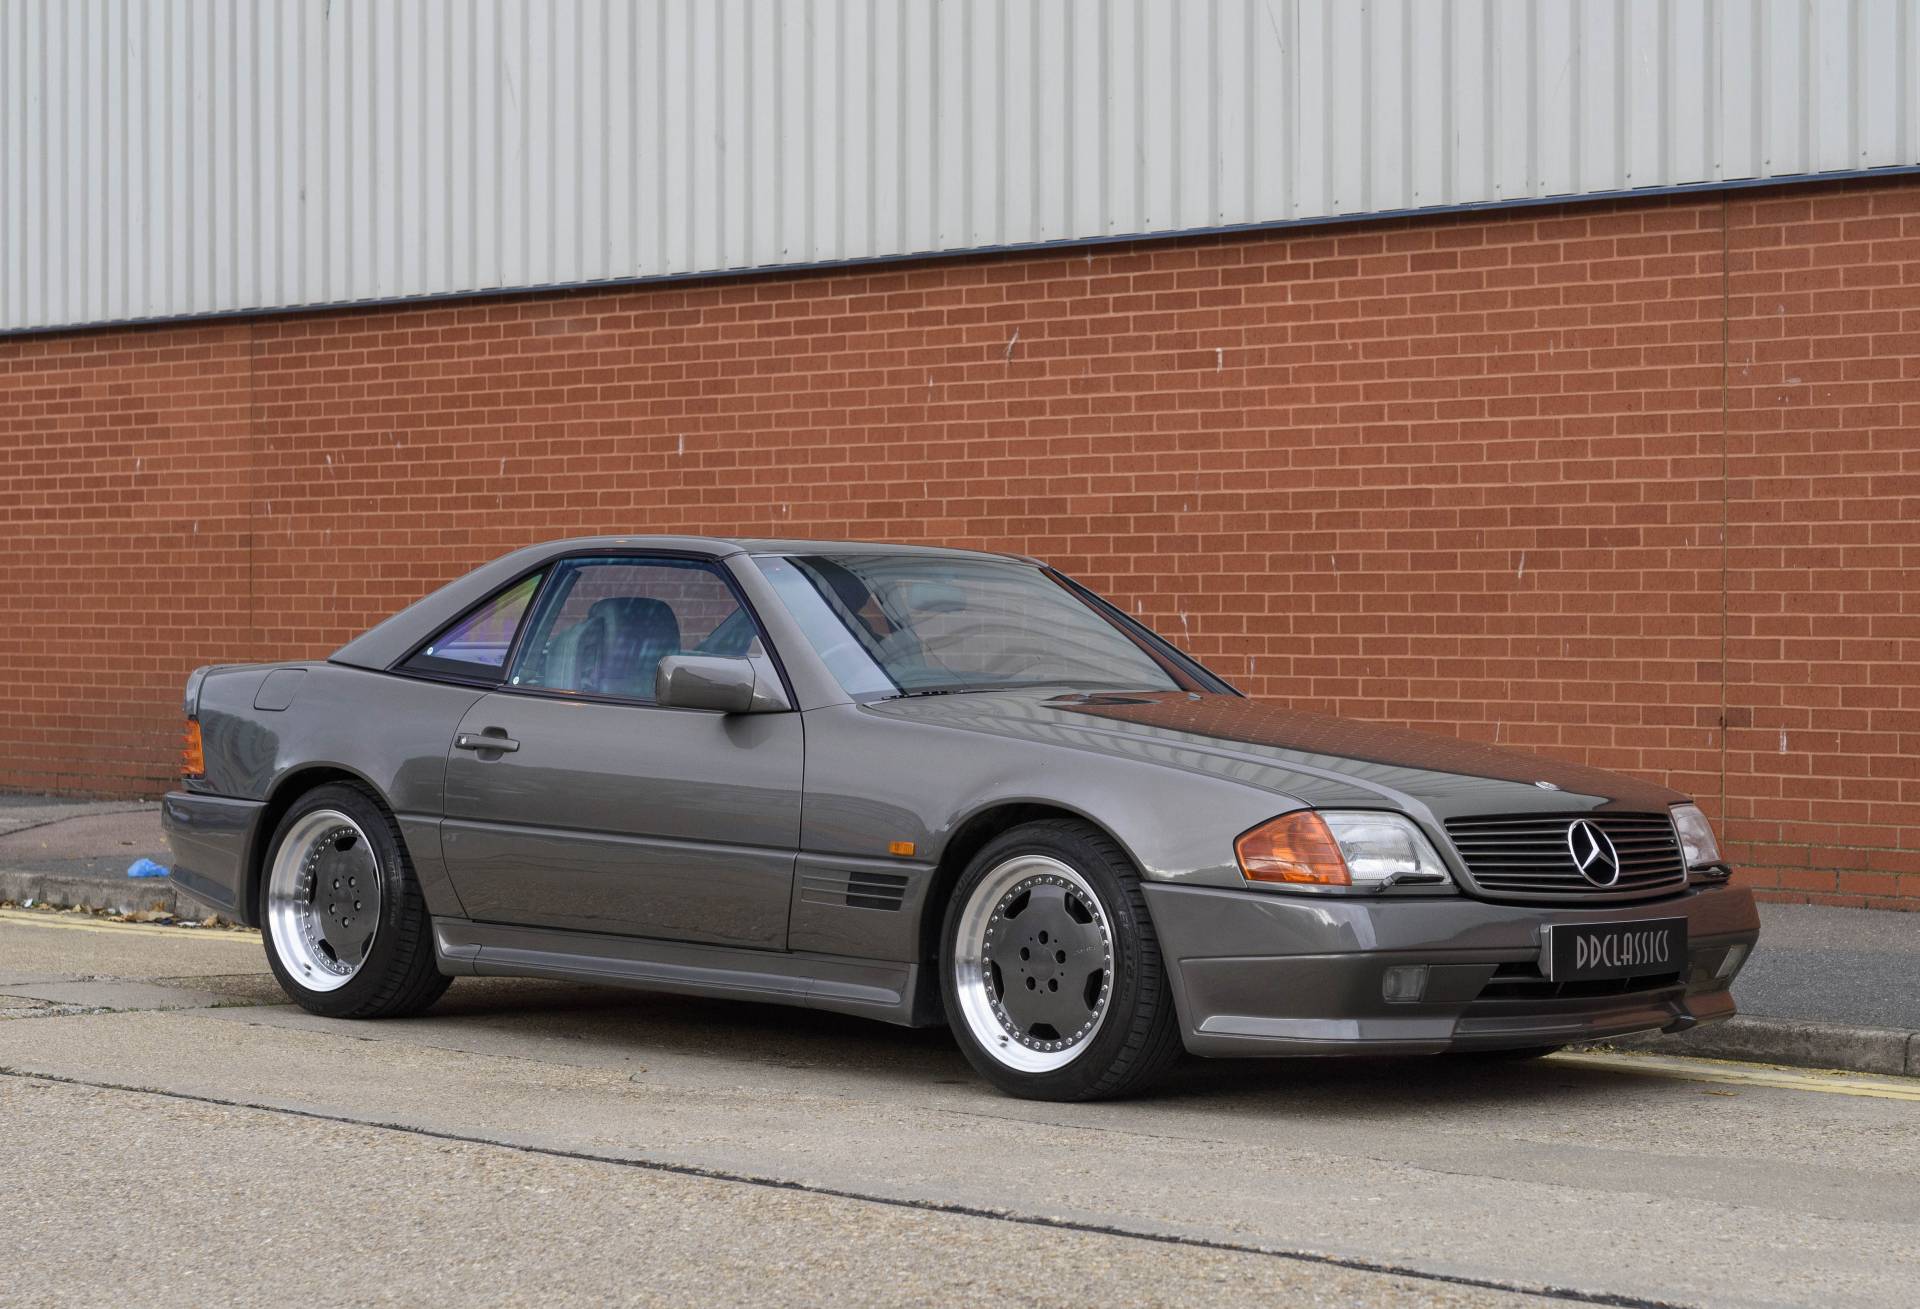 For Sale MercedesBenz 500 SL 6.0 AMG (1992) offered for